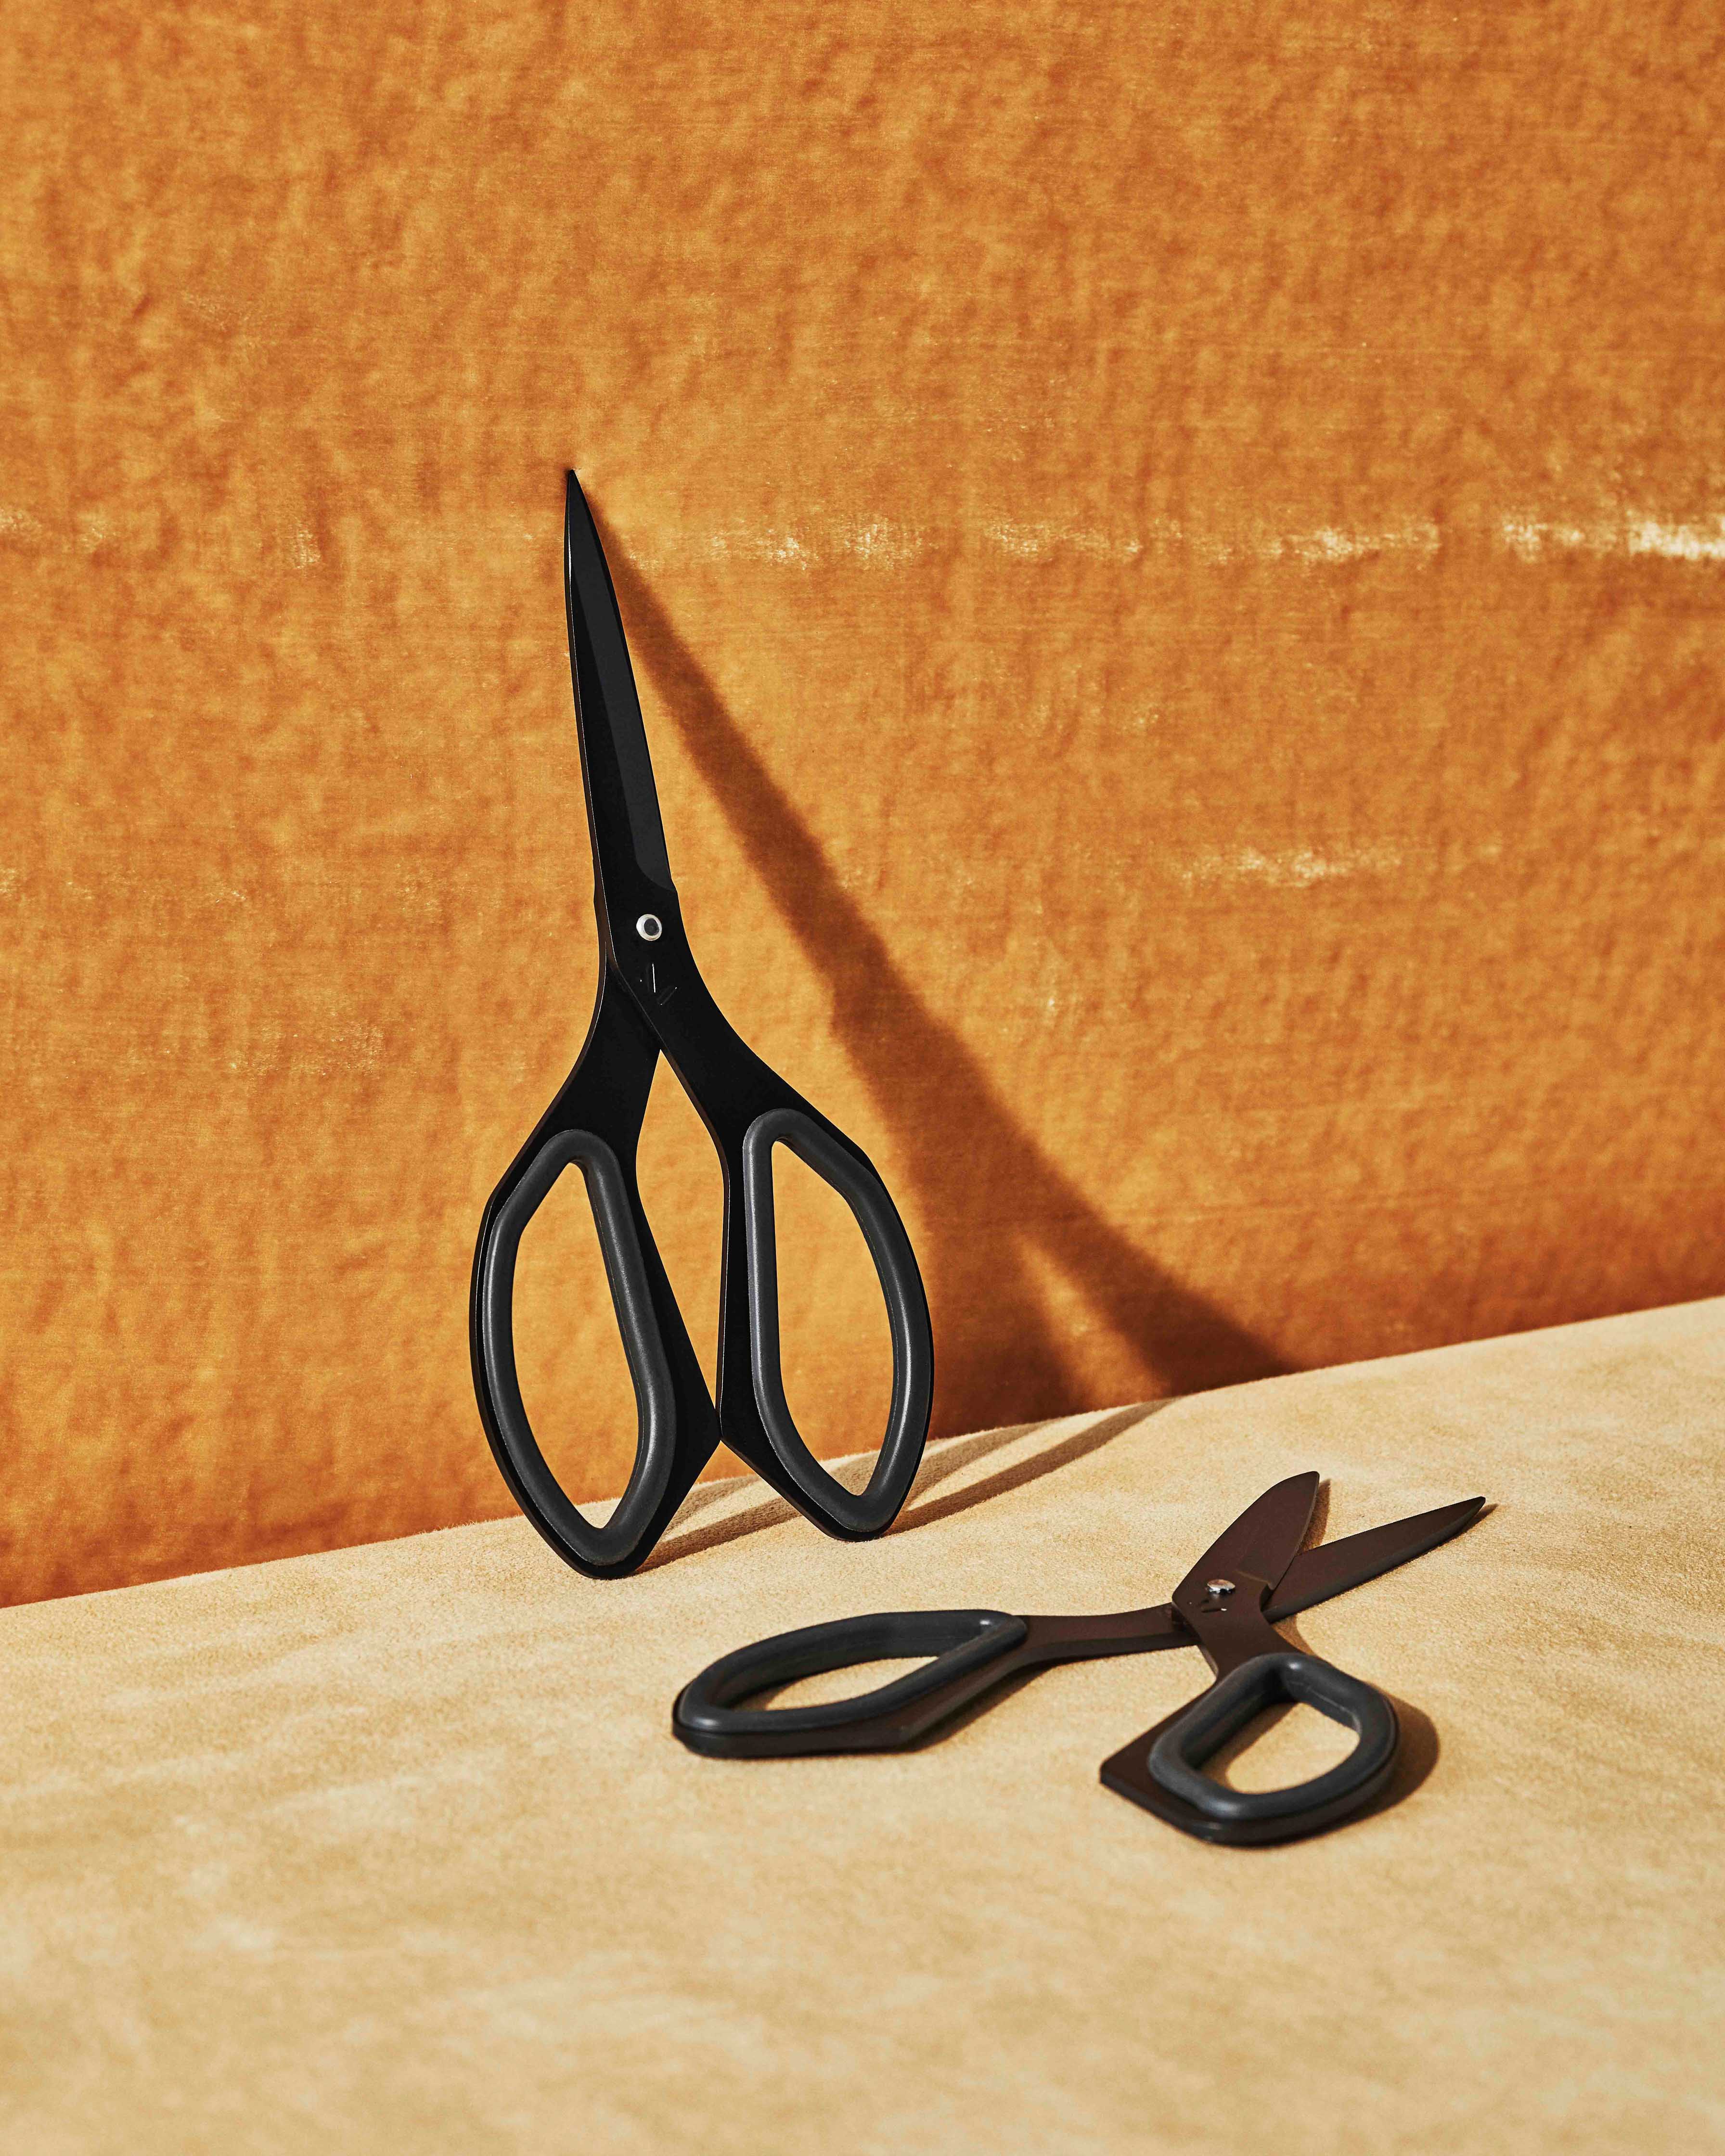 Material The Good Shears - Golden